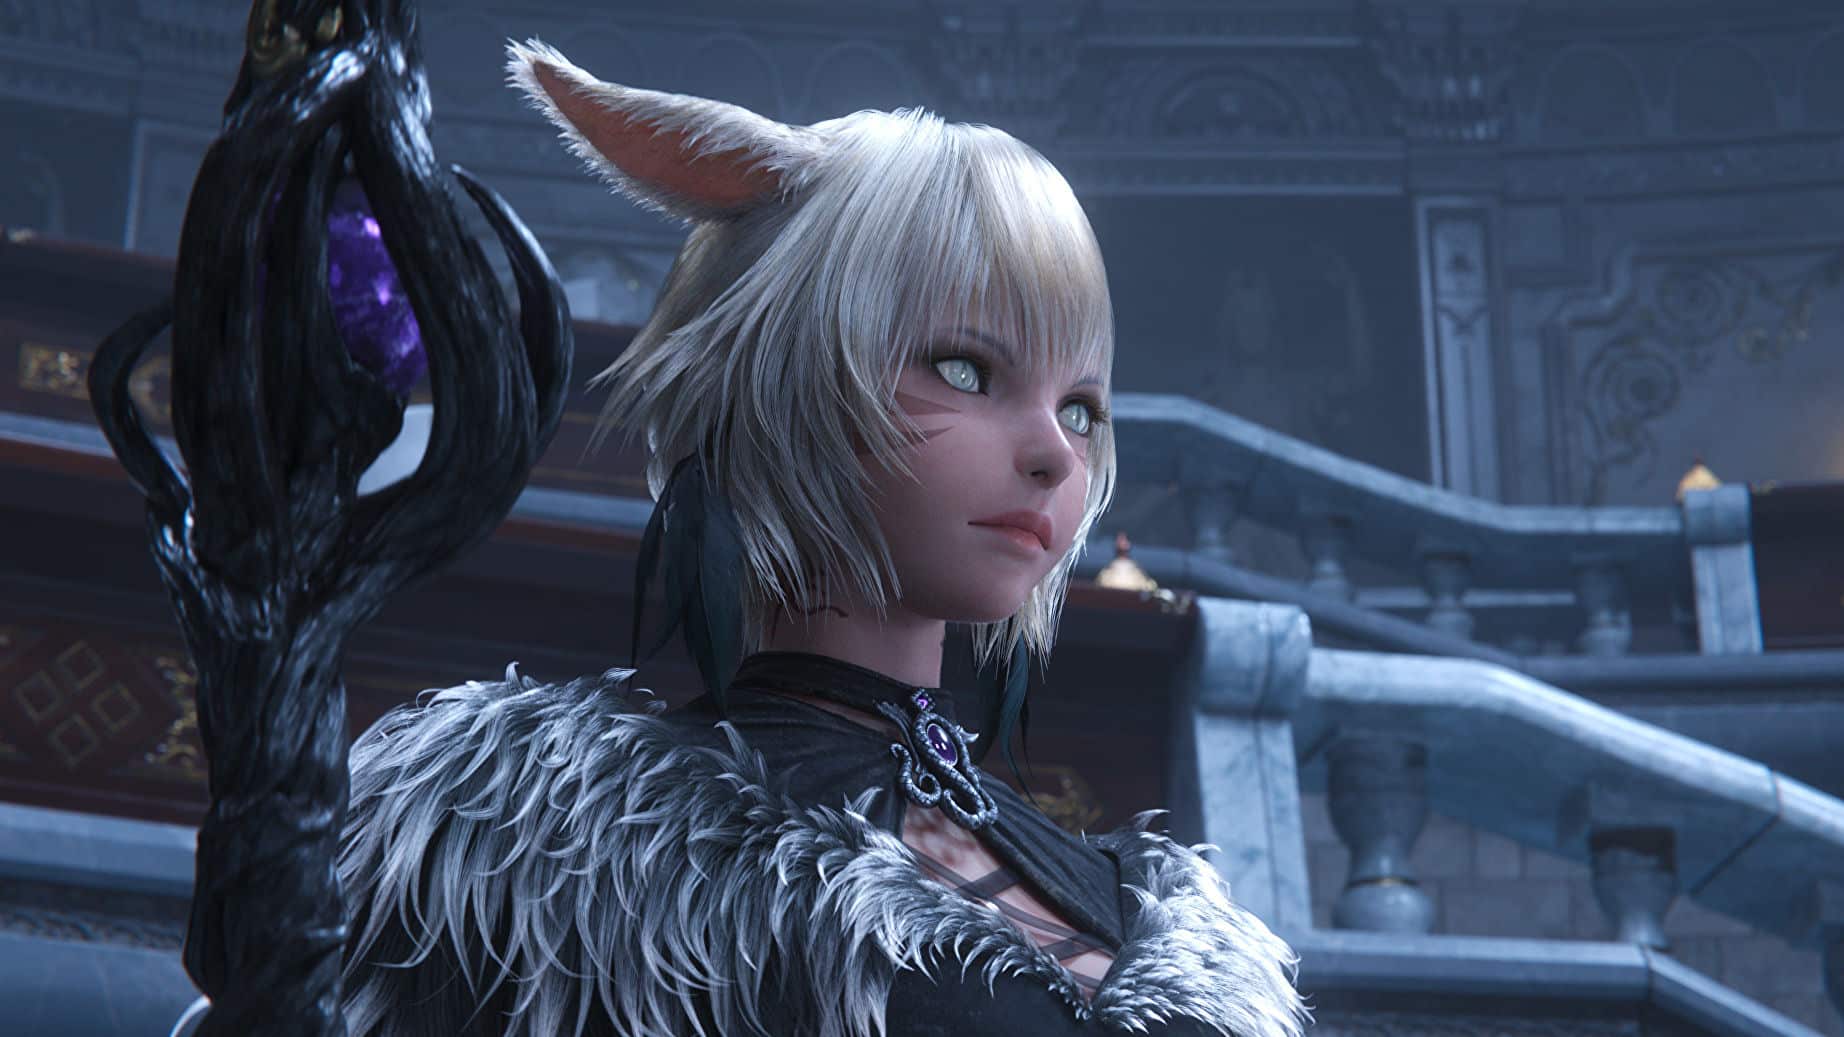 How to access FFXIV Online: one-time password, free trial version